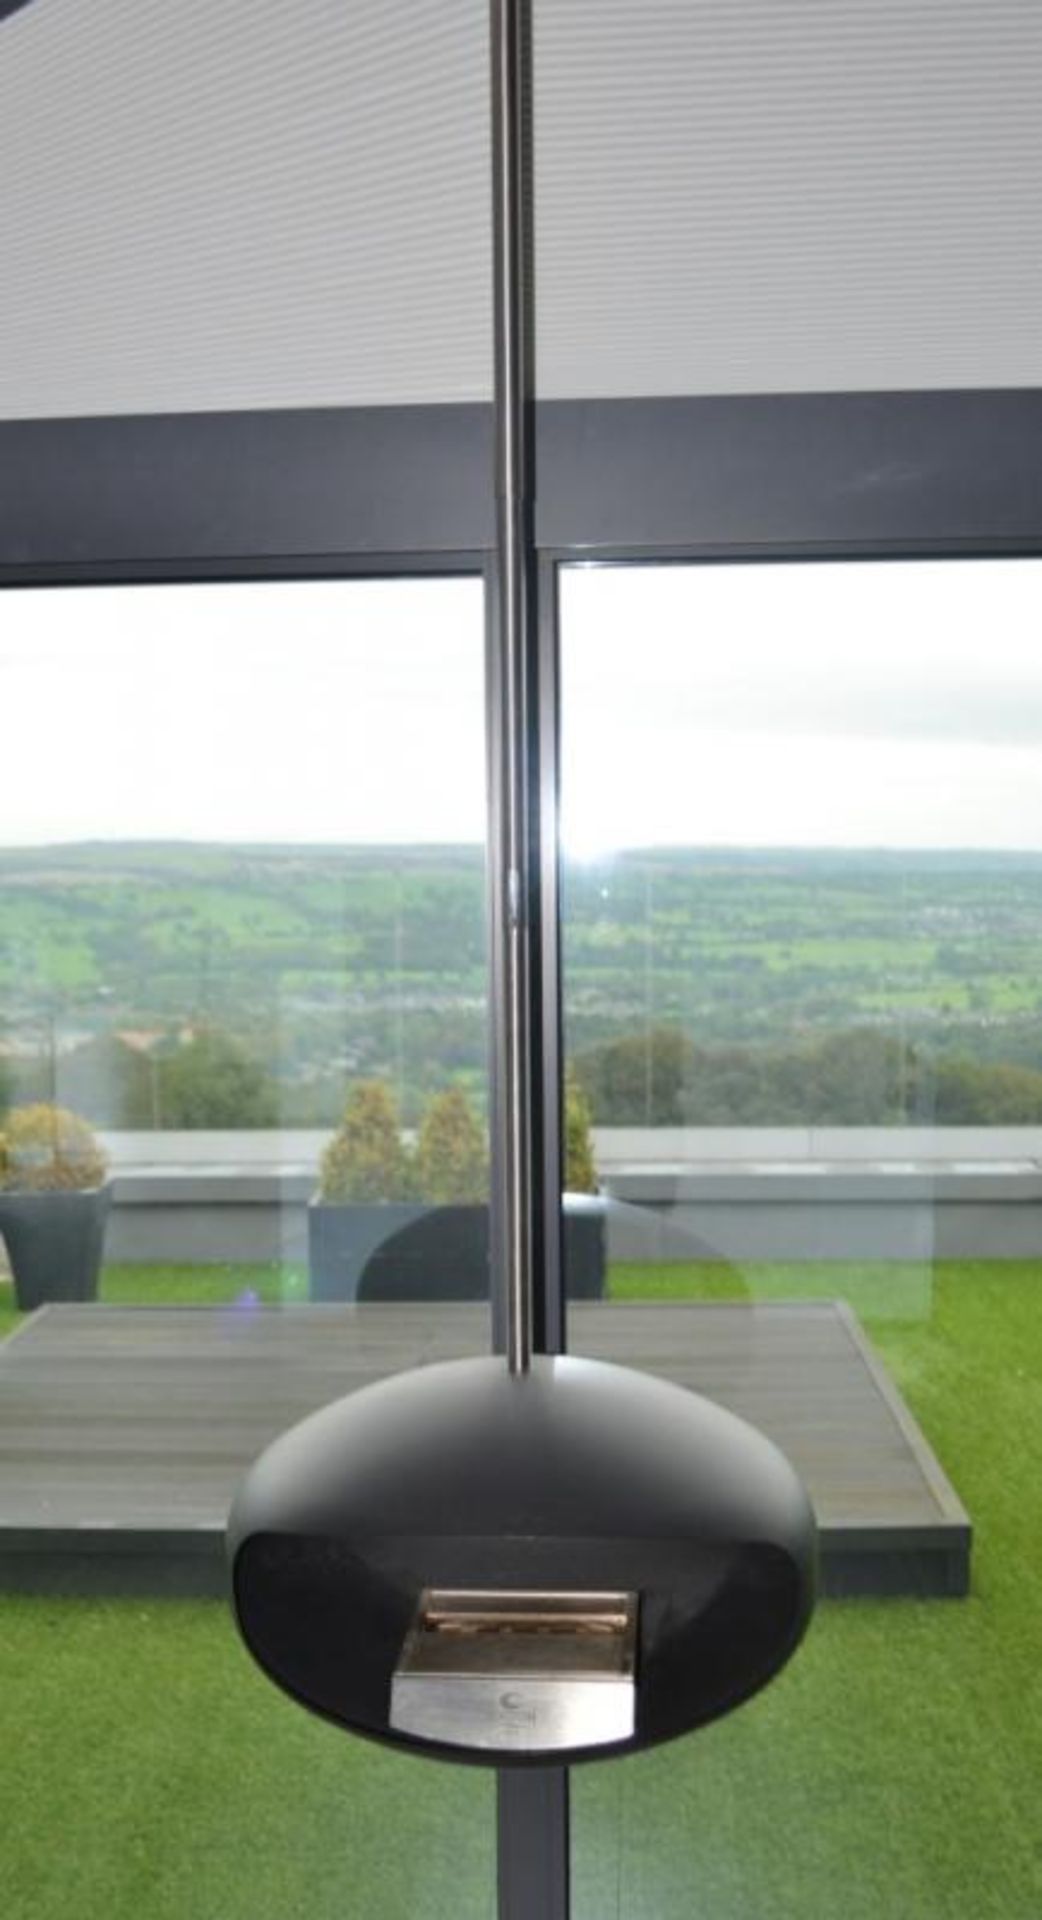 1 x Aeris Hanging Cocoon Fireplace Finished In Black - CL439 - Location: Ilkley LS29 - Used In Excel - Image 4 of 5